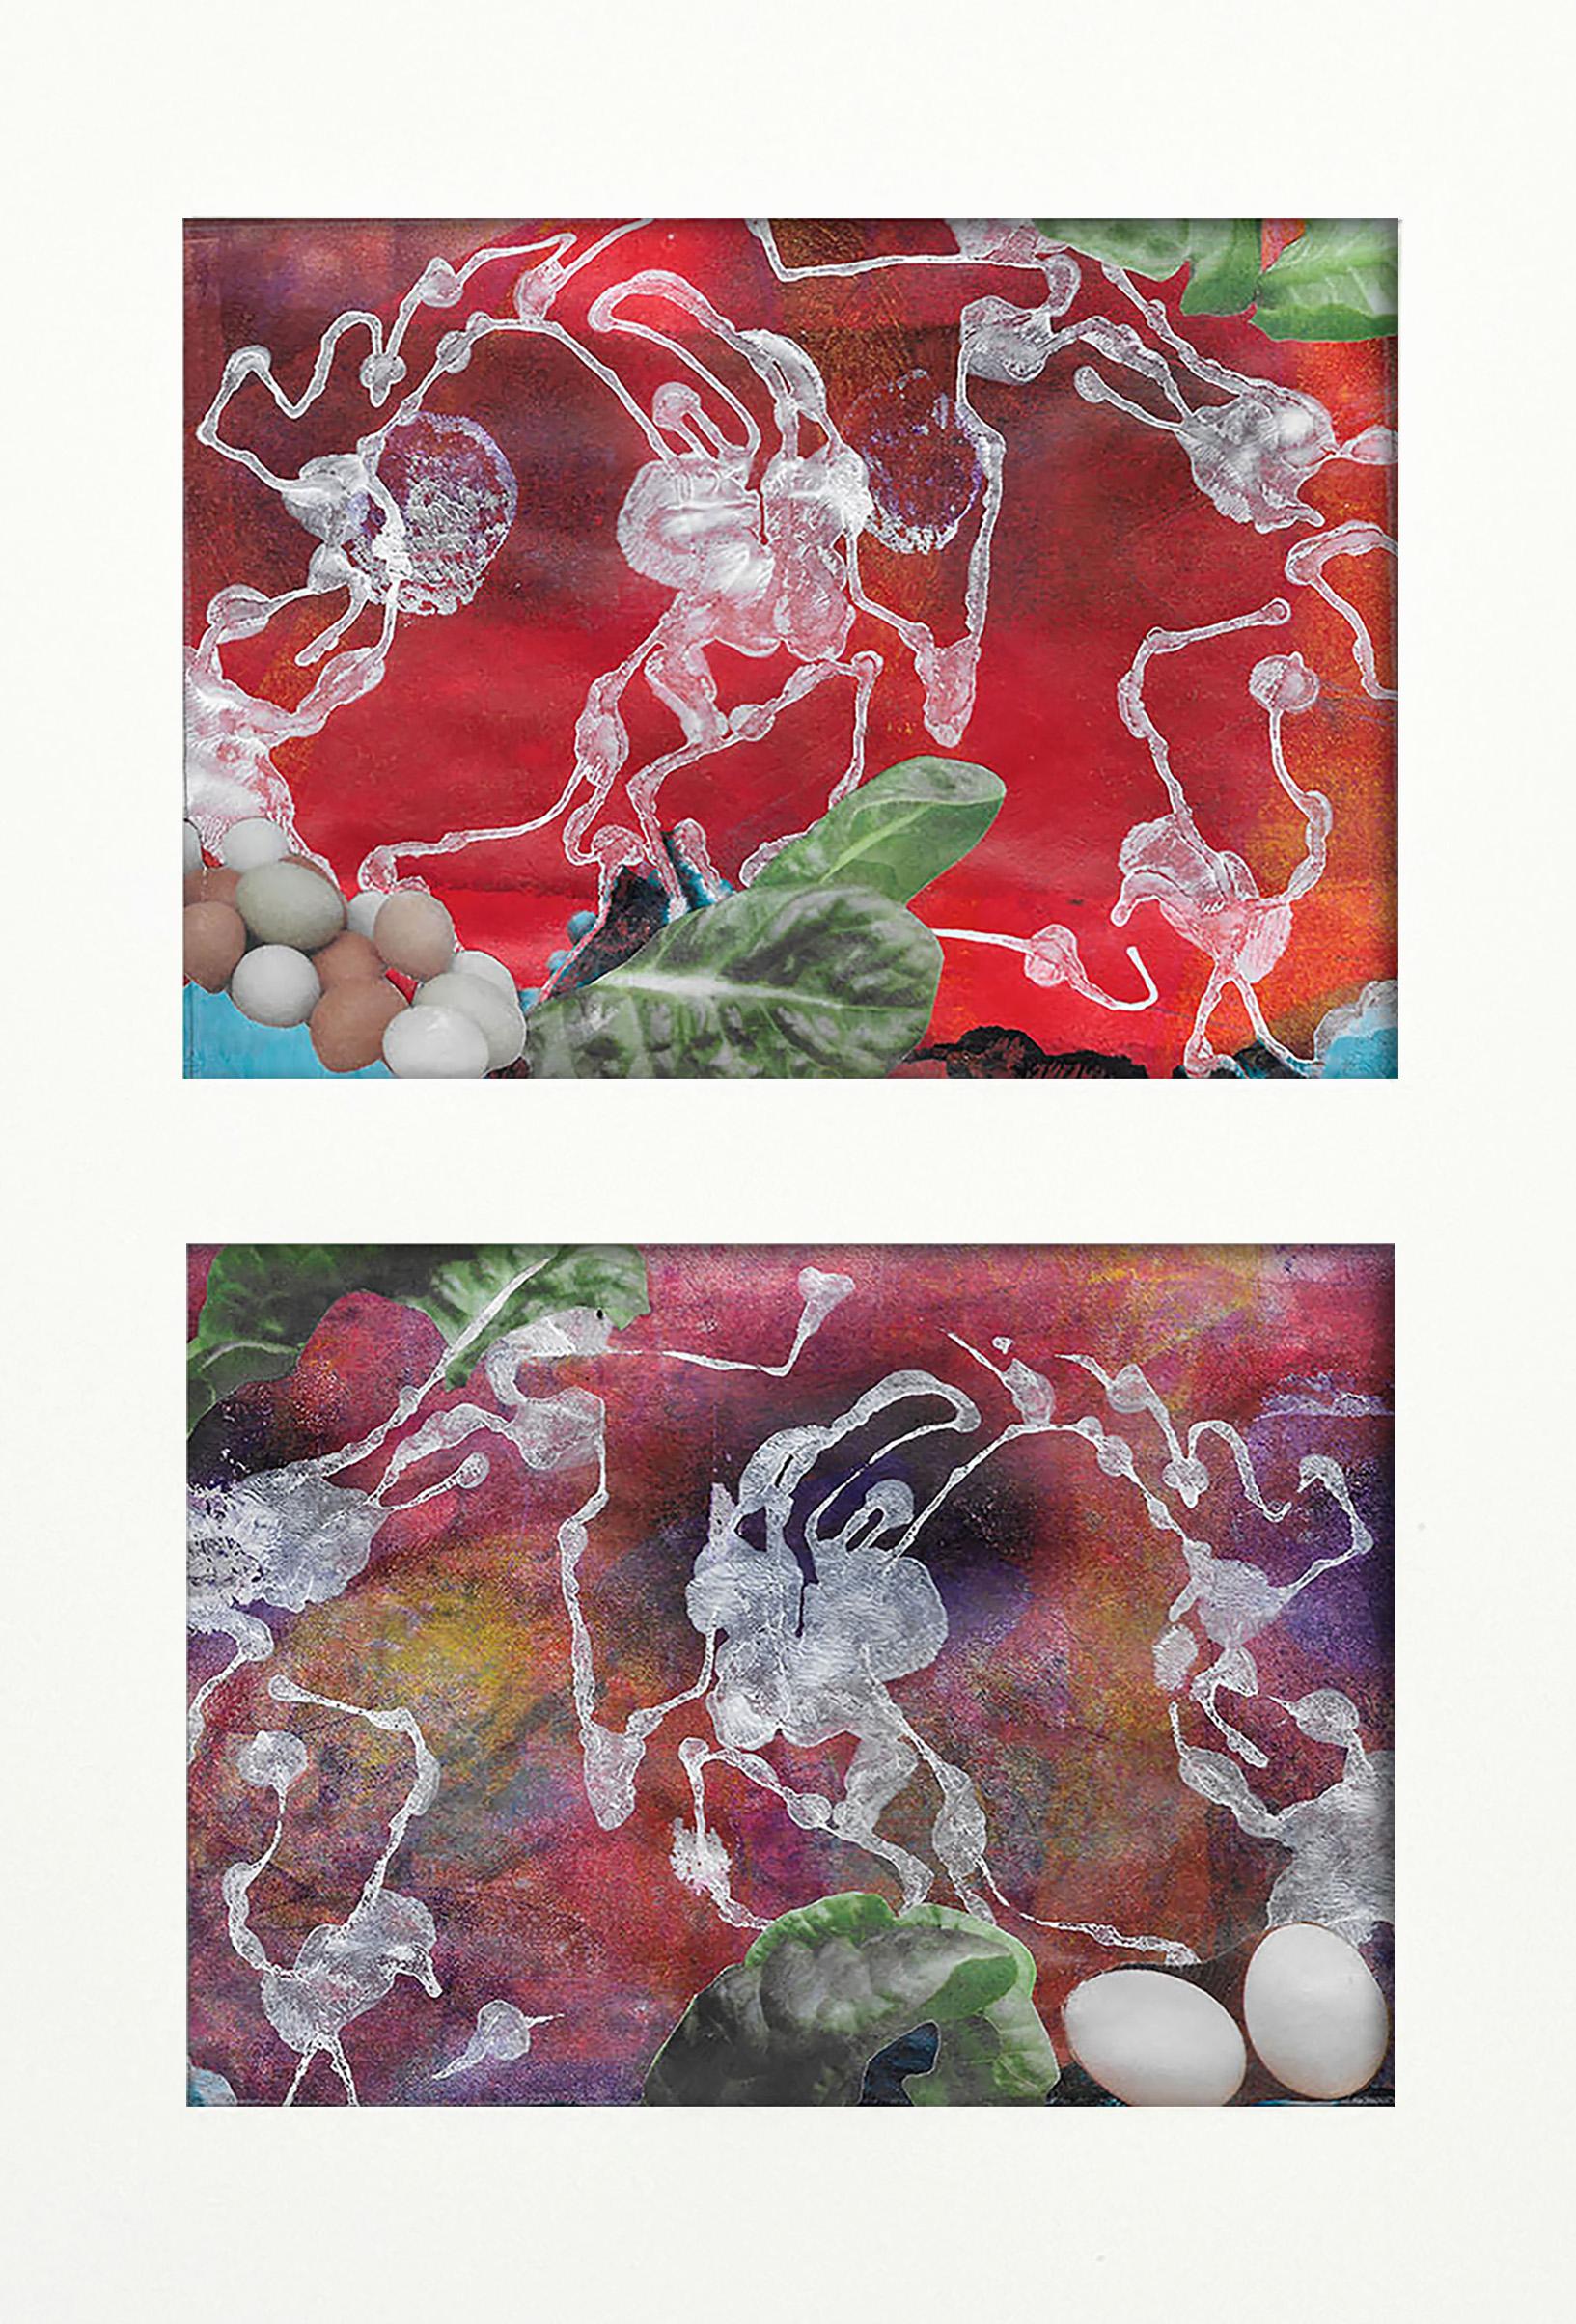 "Zigzag", abstract, diptych, whimsical, eggs, green, red, ivory, white, collage